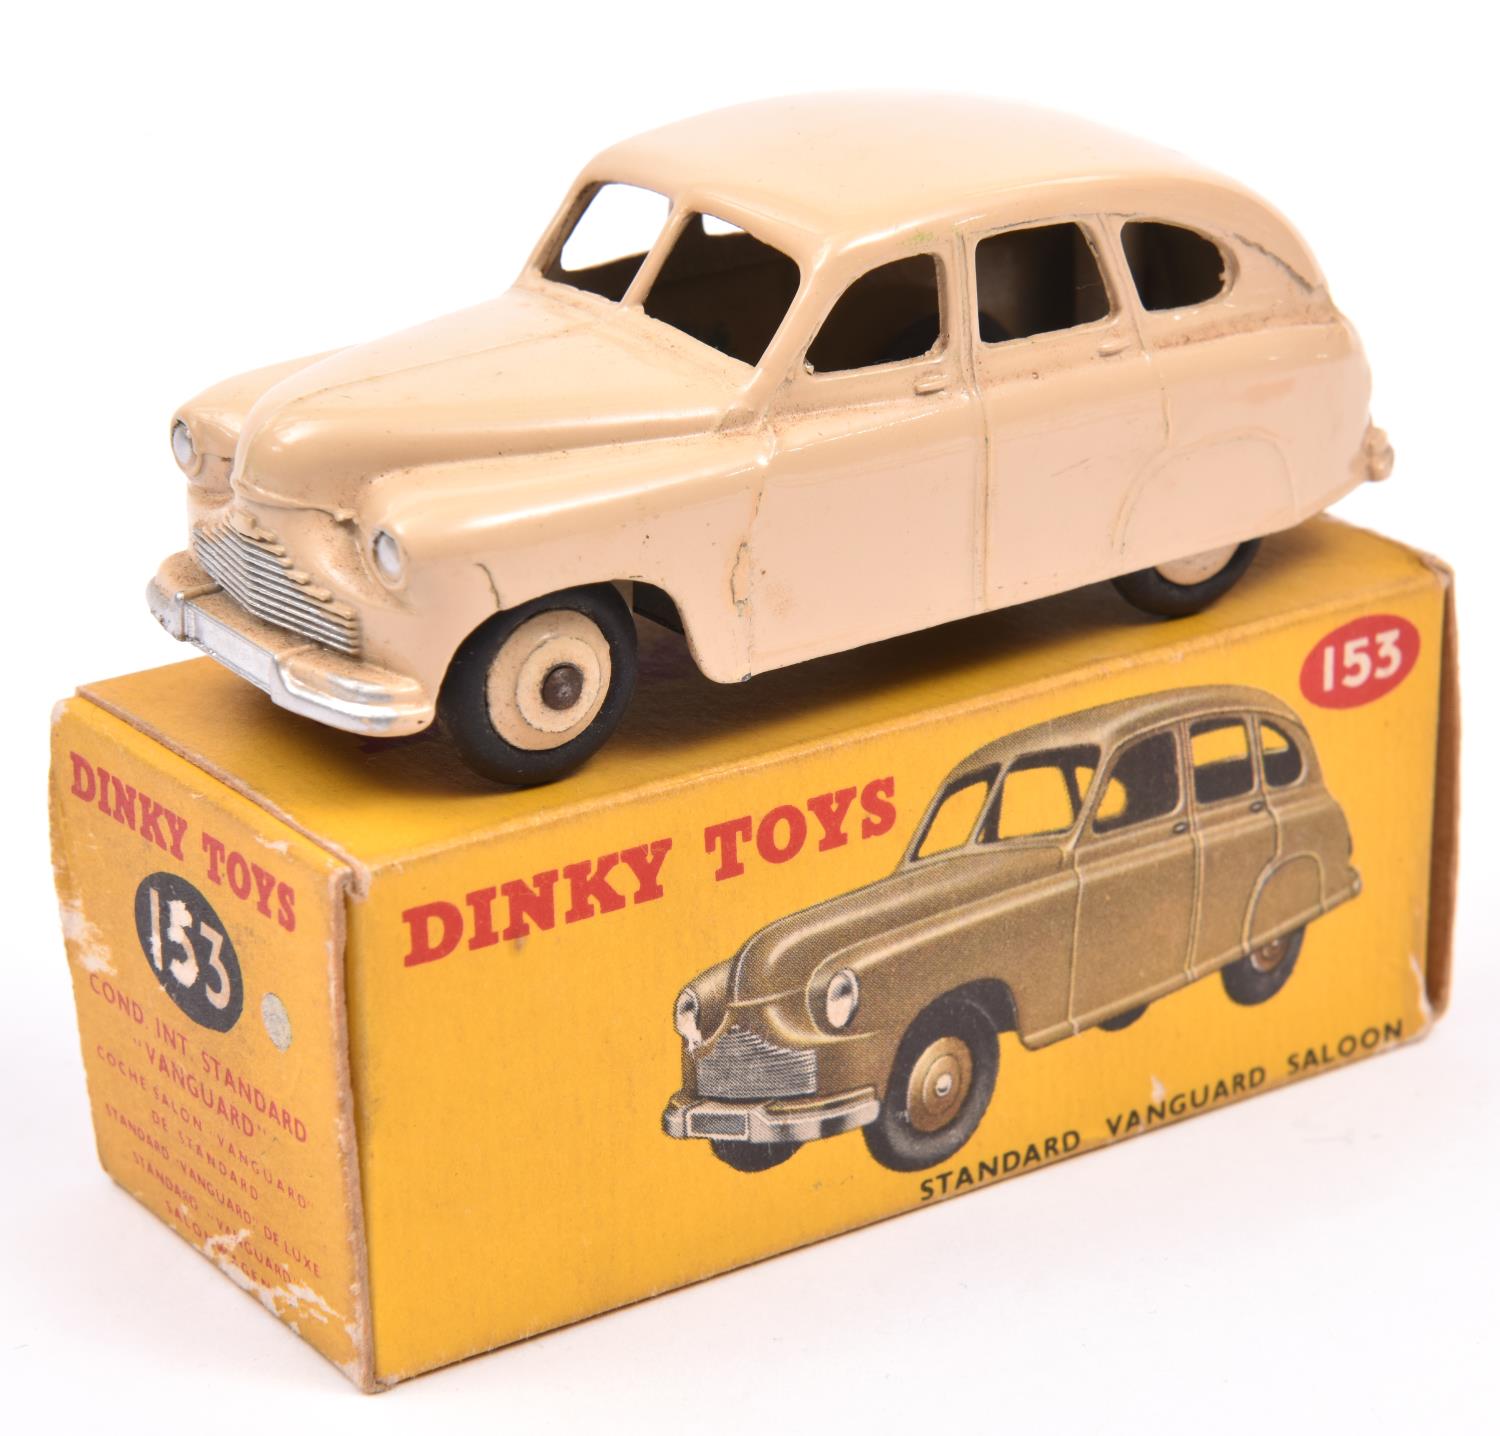 Dinky Toys Standard Vanguard Saloon(153). An example with covered rear wheel arches, in cream with